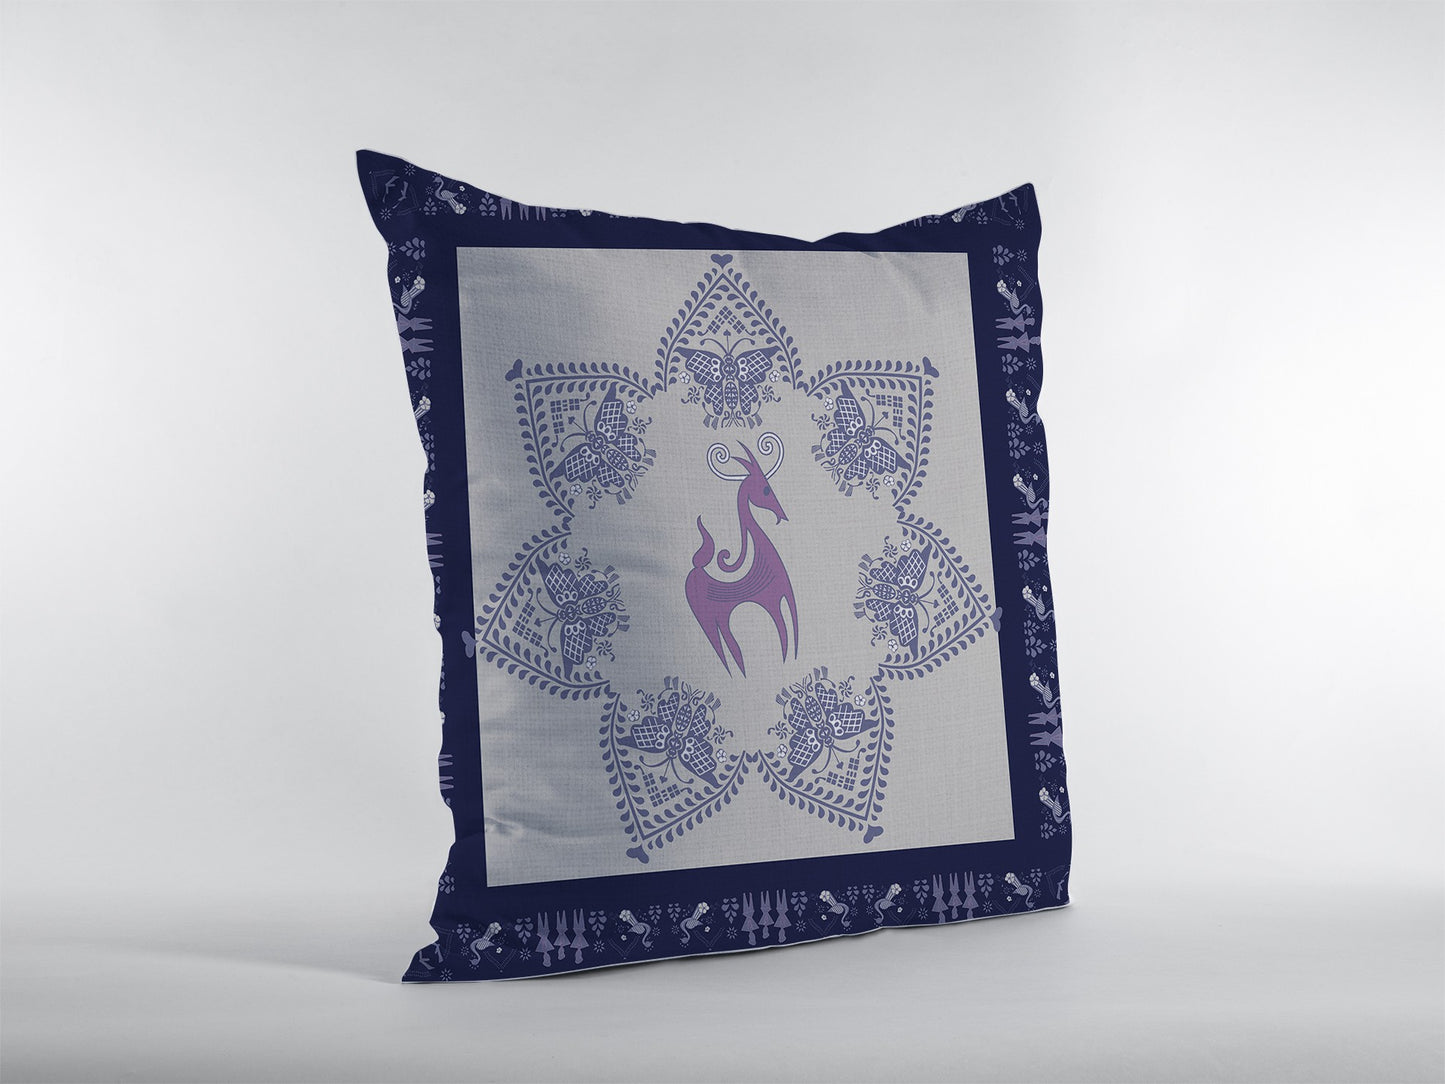 16” Gray Purple Horse SuedeThrow Pillow